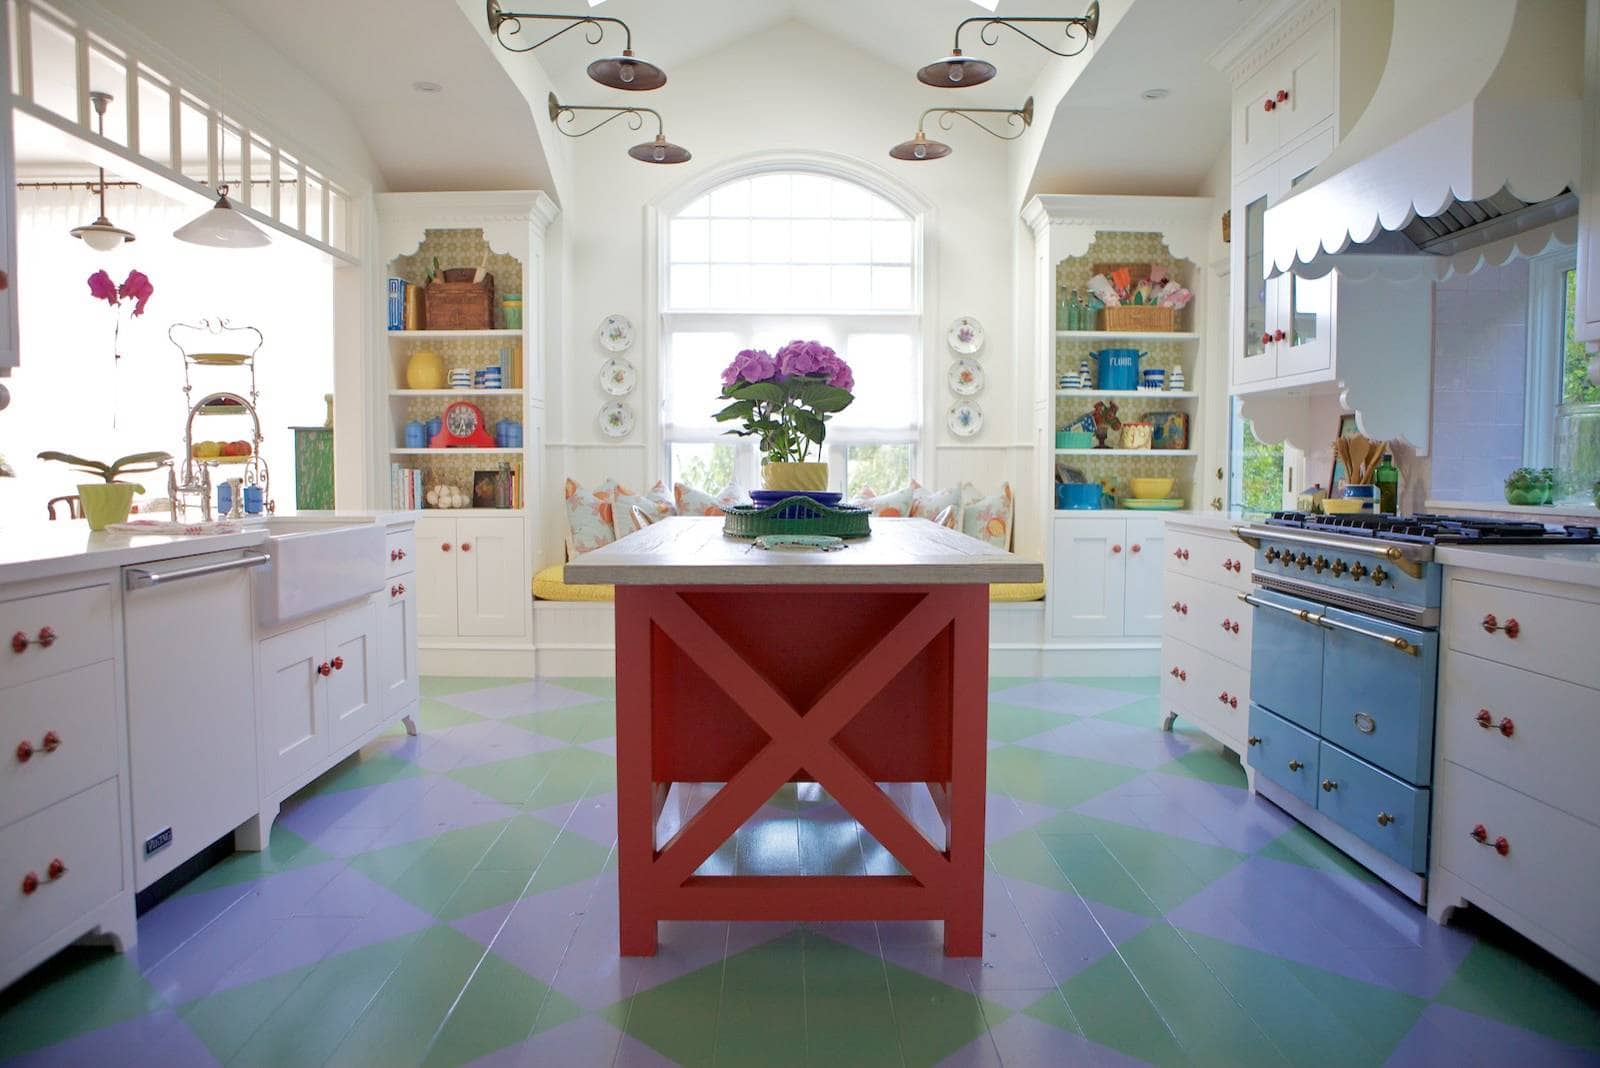 Room in beach english cottage style featuring kitchen with red kitchen island